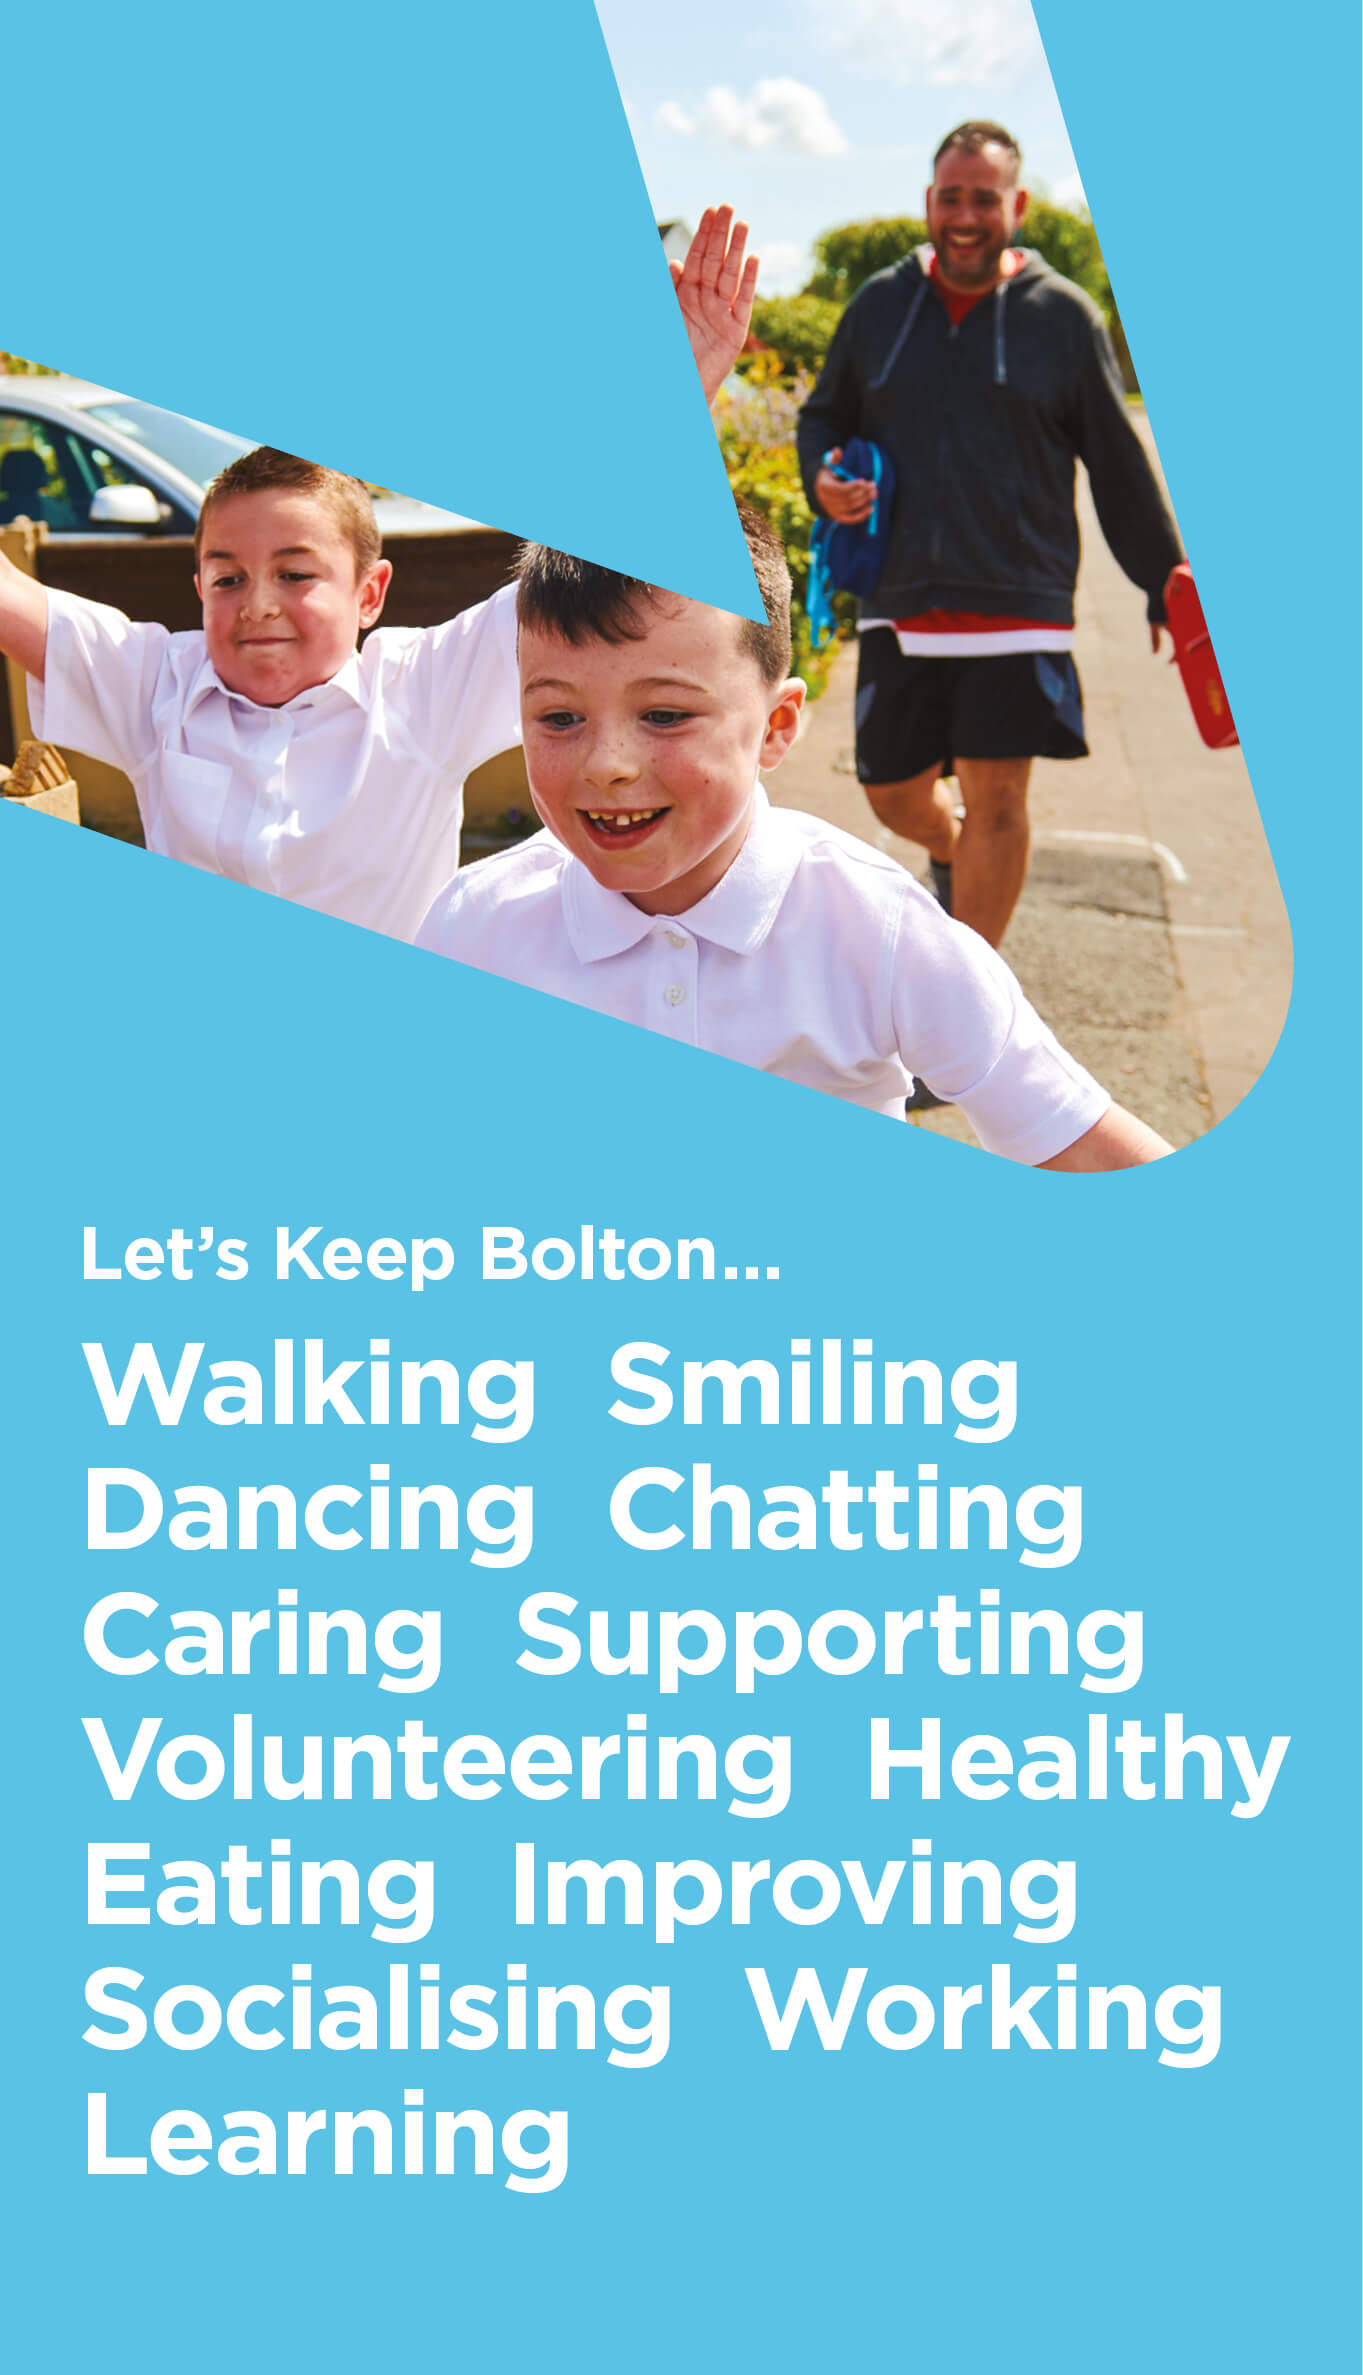 Let's Keep Bolton... Walking, Smiling, Dancing, Chatting, Caring, Supporting, Volunteering, Healthy Eating, Improving, Socialising, Working, Learning